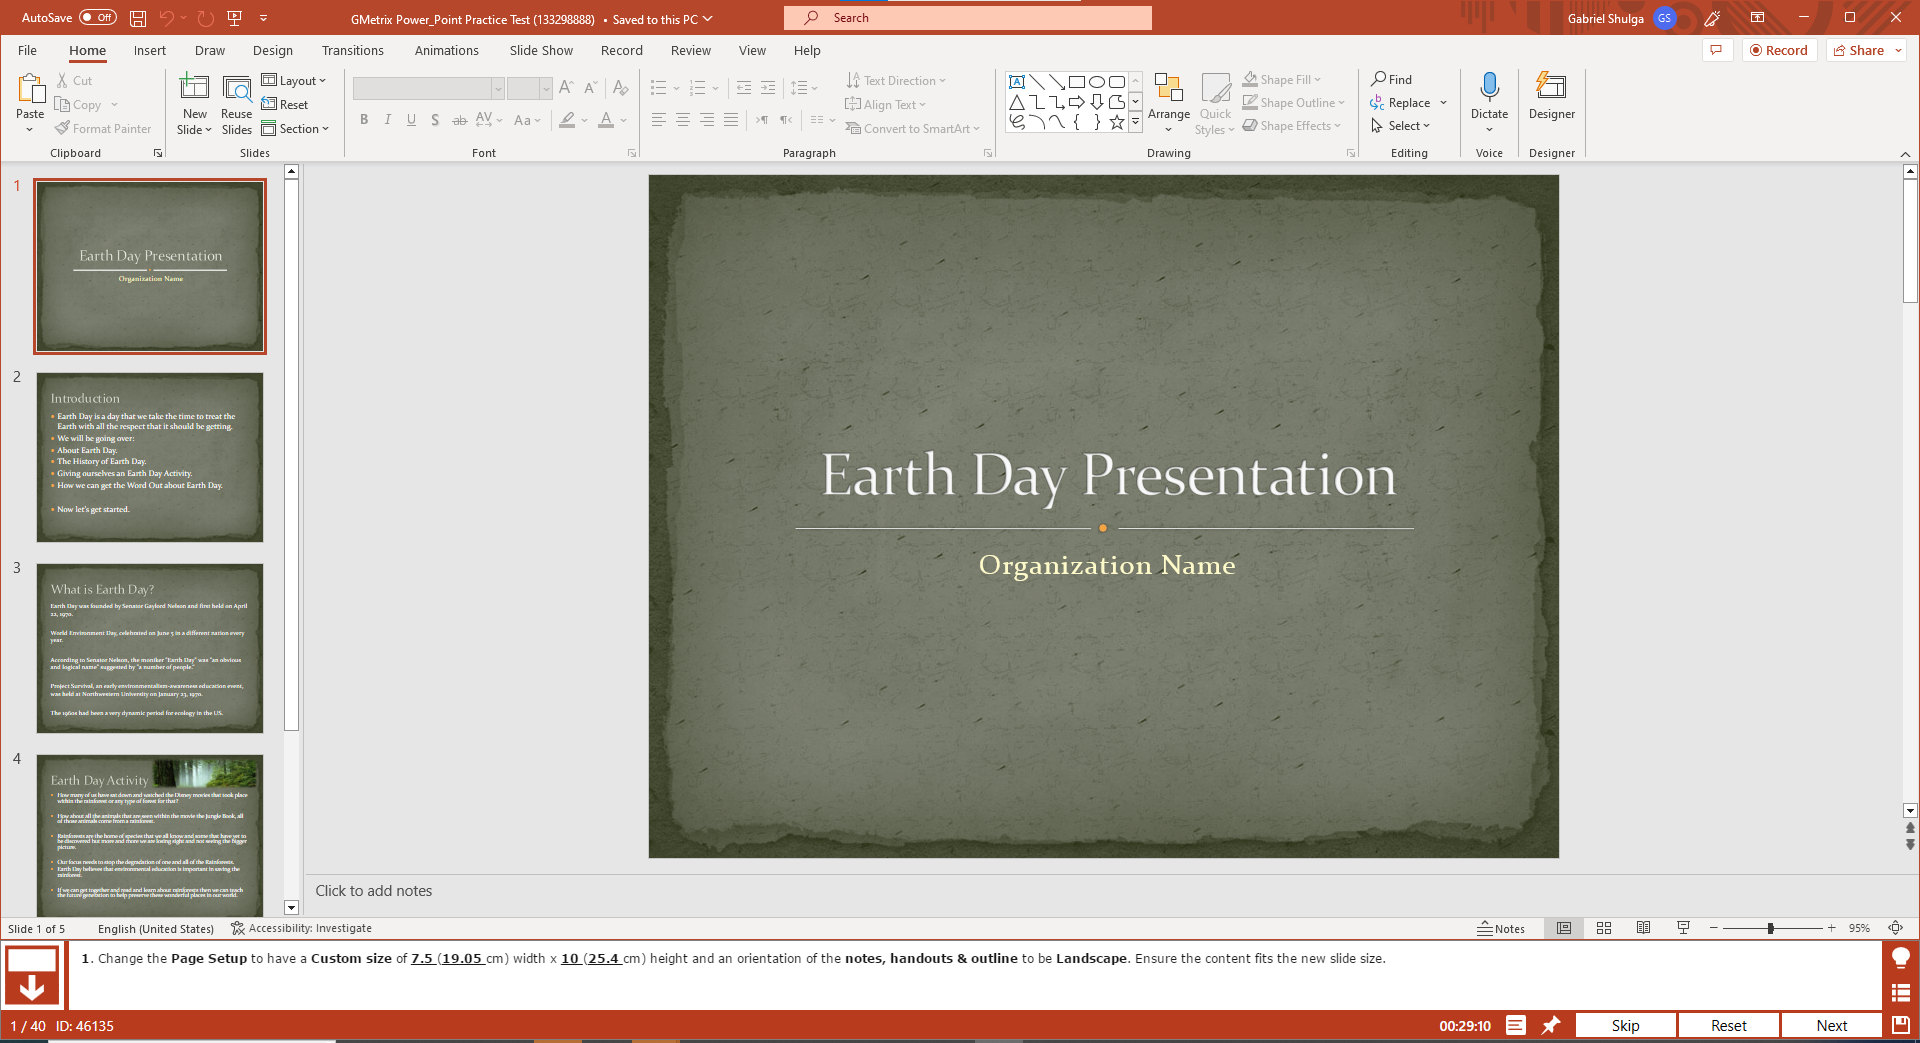 Create and manage presentations and slides